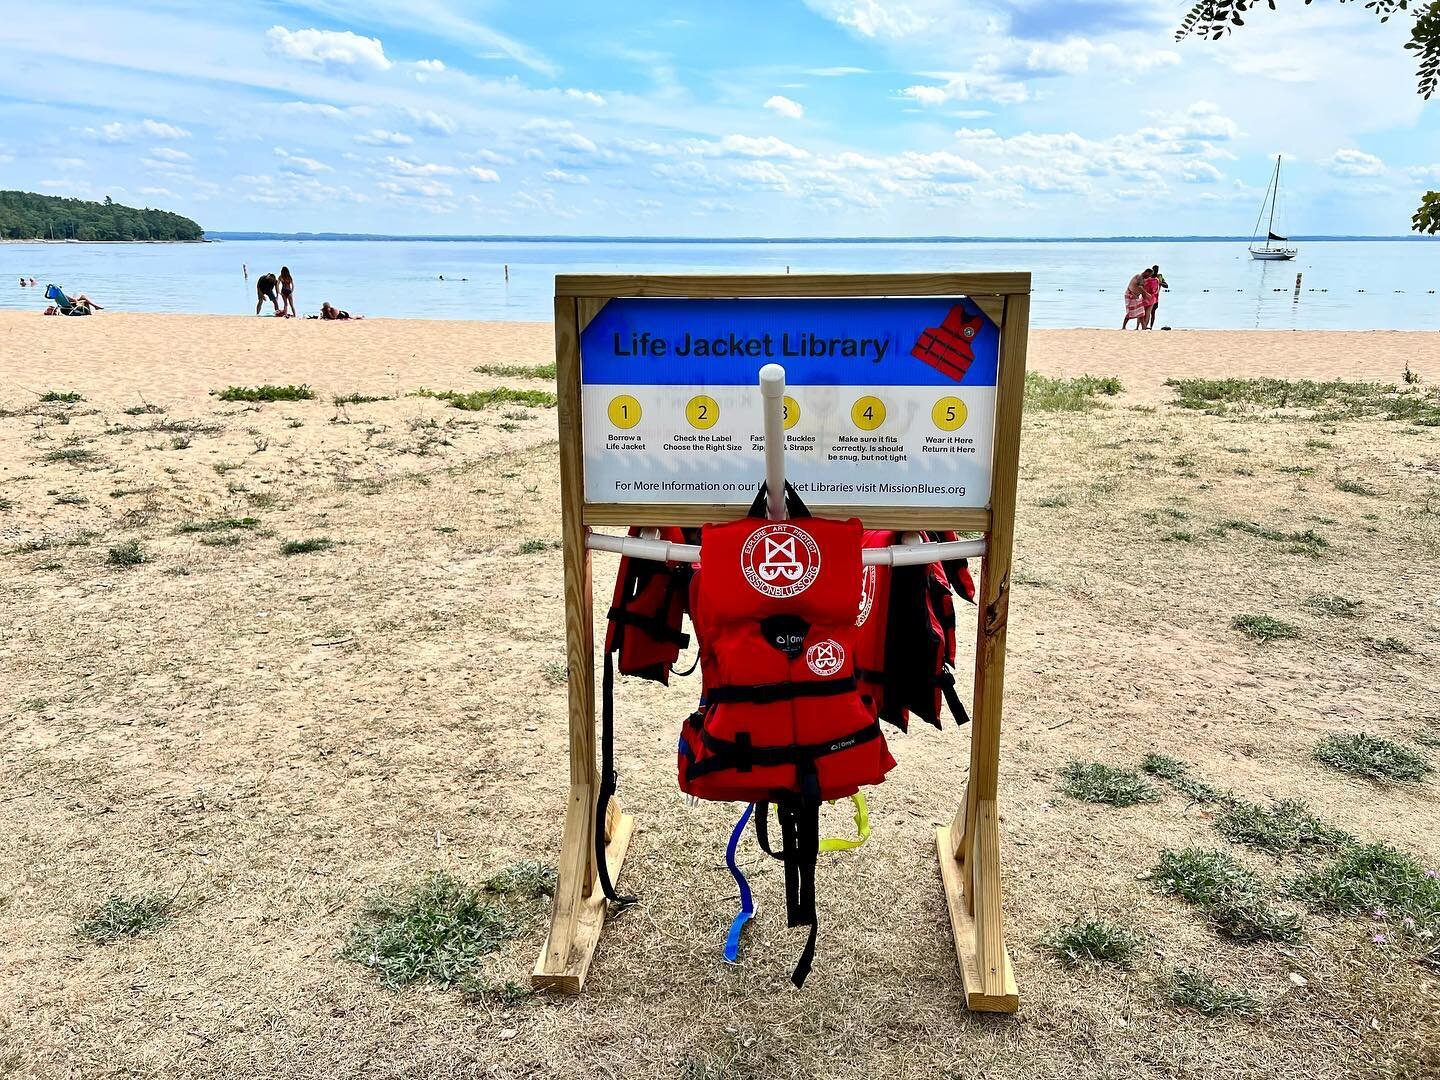 We are thrilled that Old Mission Peninsula&rsquo;s excitement for our Life Jacket Library landed us a welcoming spot at Haserot Beach! 

Not only do we love to SCUBA dive there, it is also a place where families make wonderful beach memories and many